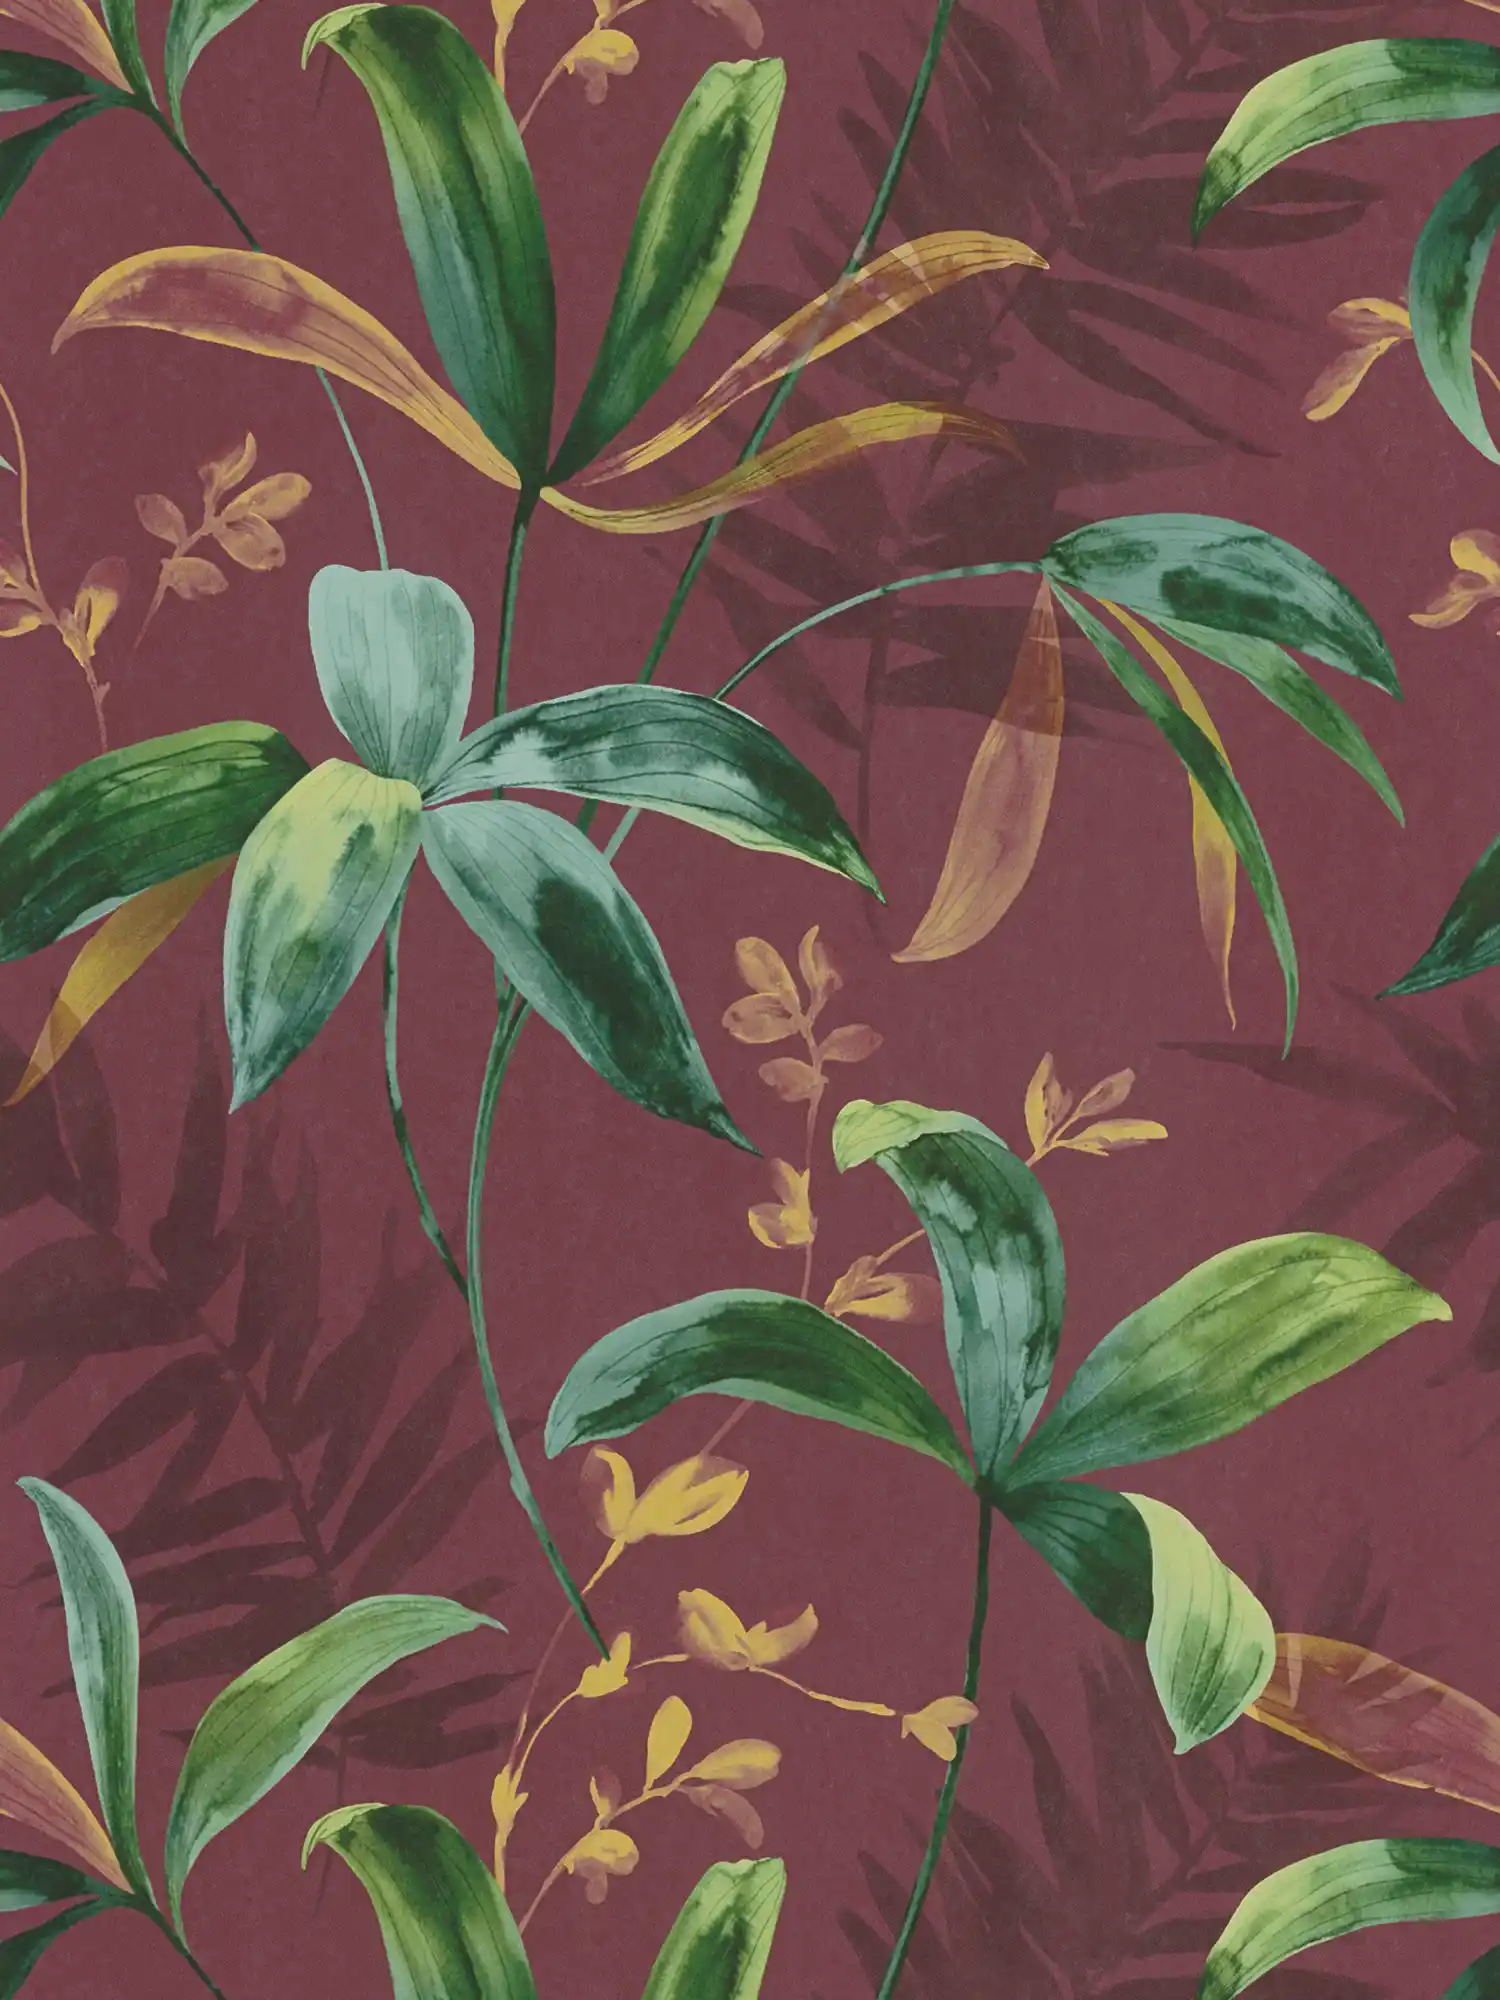 Dark red wallpaper with green leaves in watercolour style - red, green, yellow
